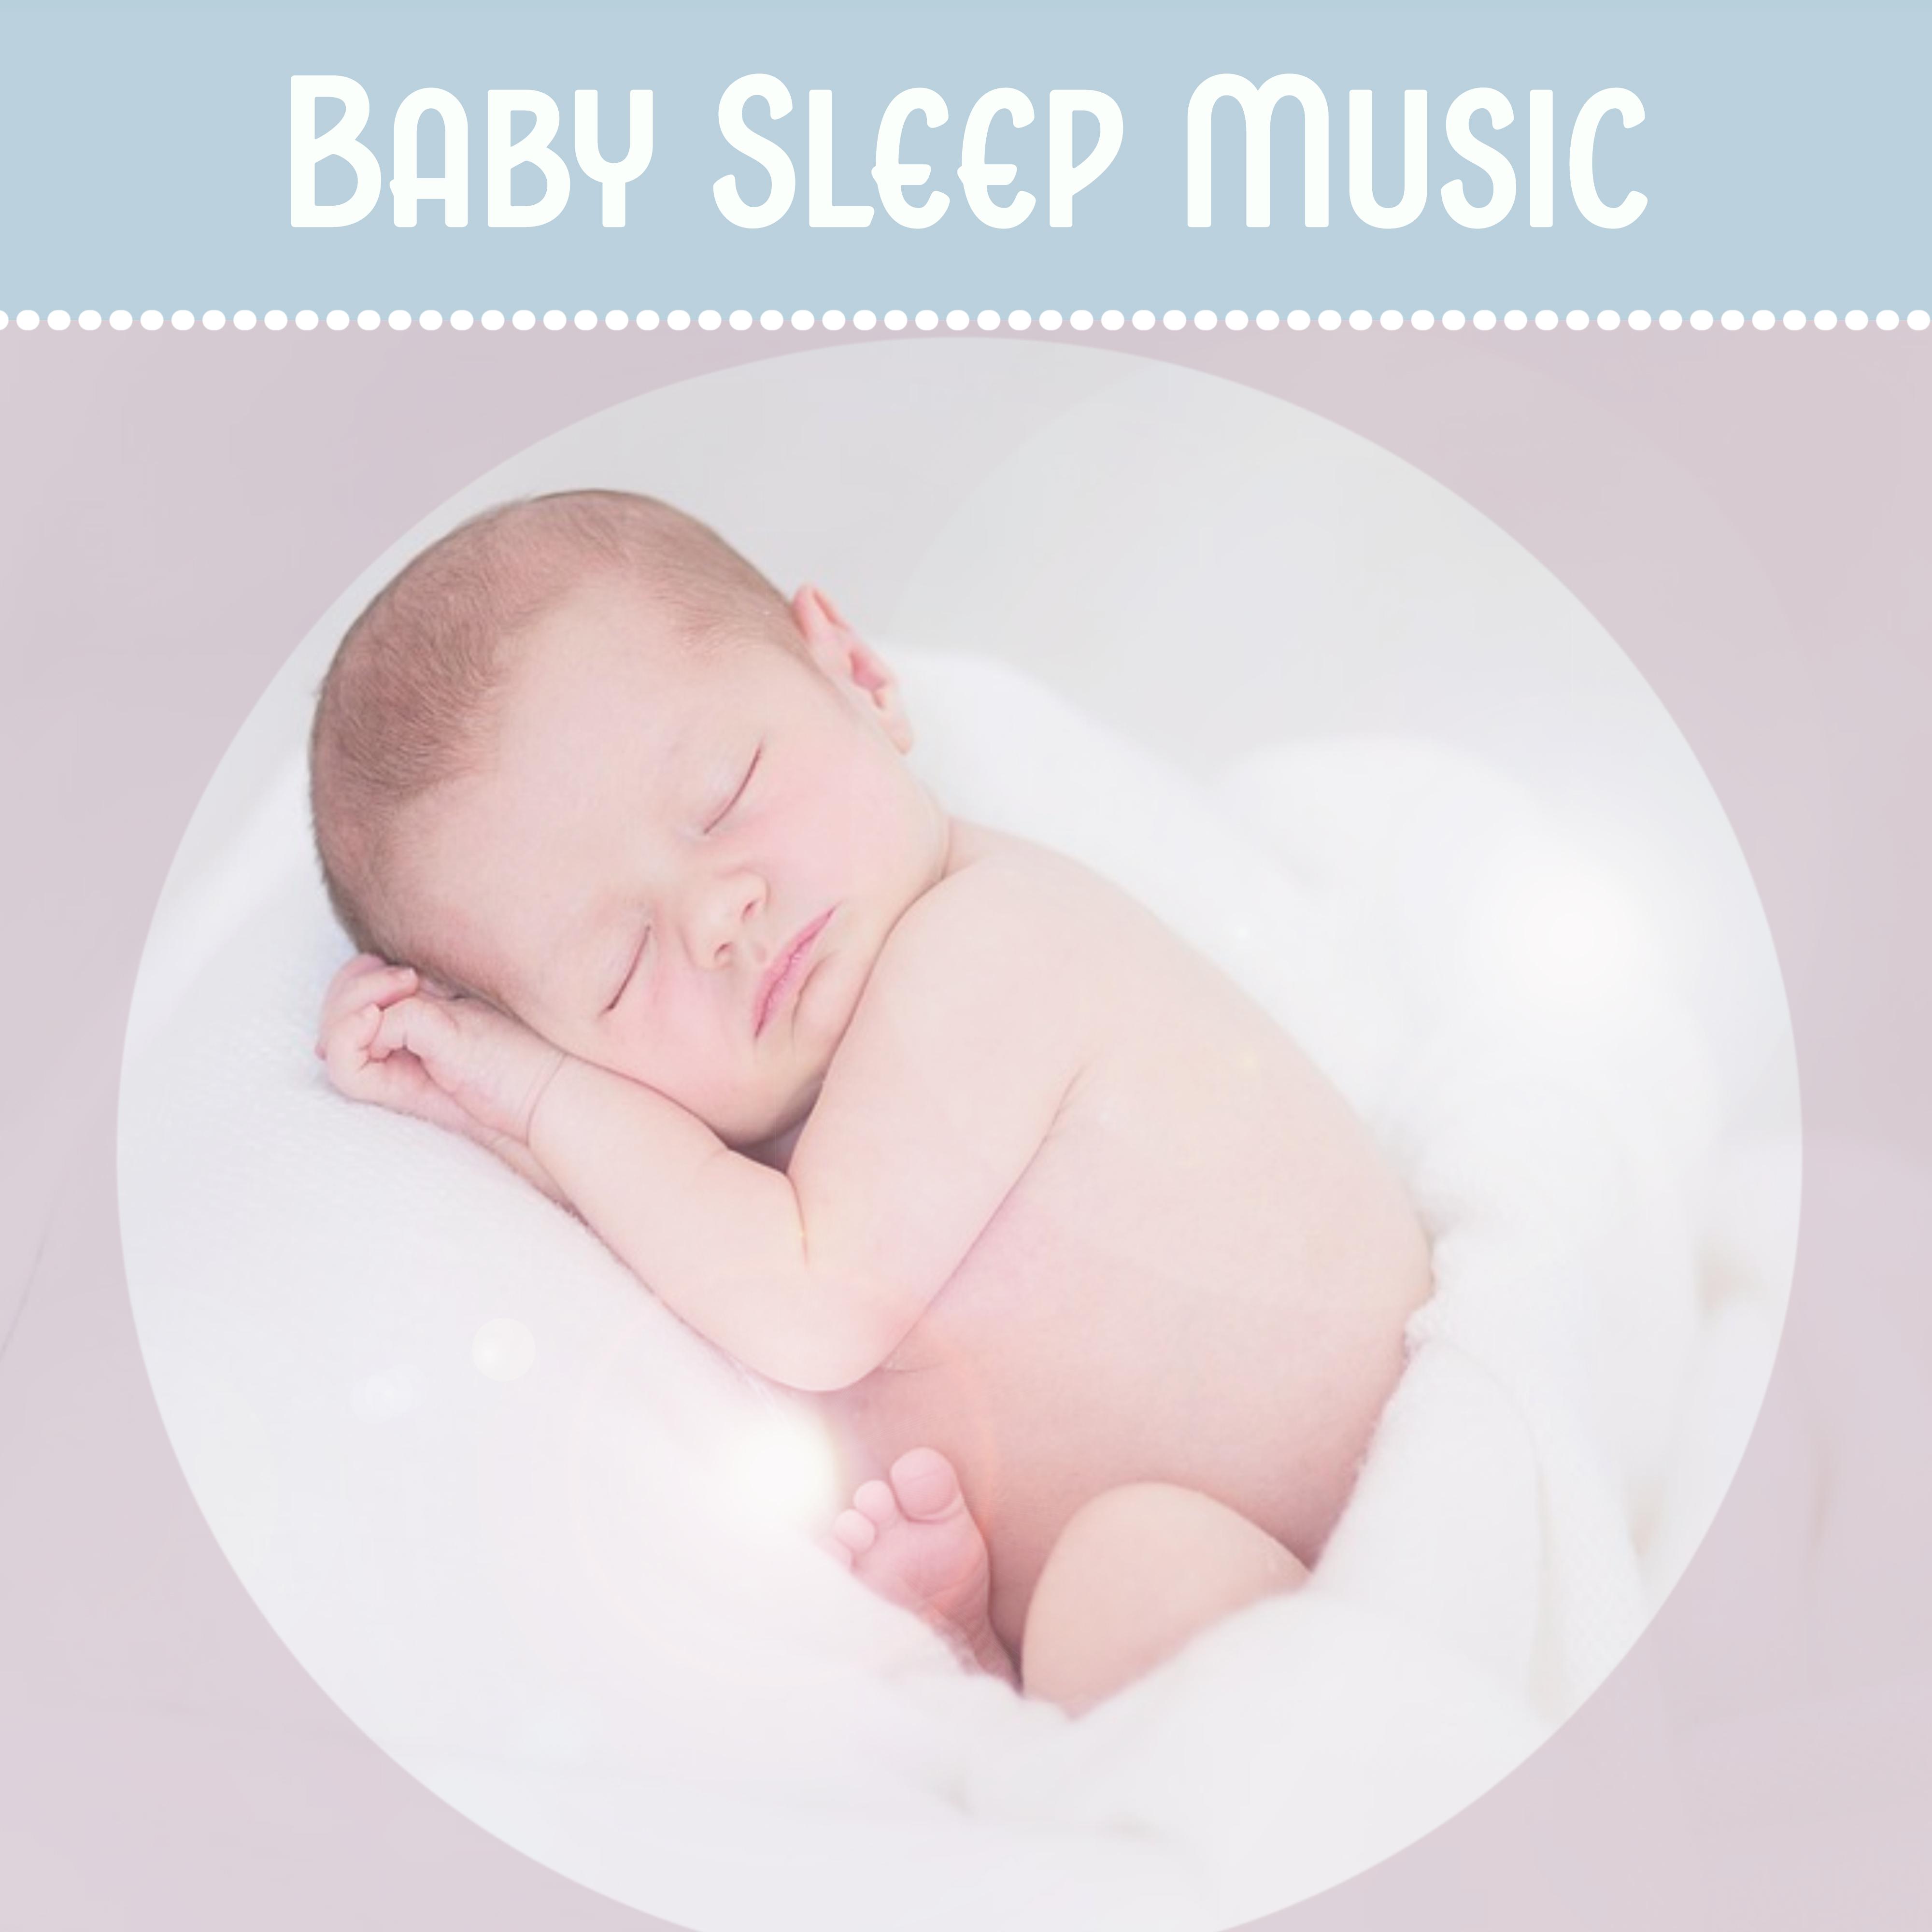 Baby Sleep Music  Soft Sounds of Birds  Ocean Waves for Baby to Easily Fall Asleep, Calm Down and Relax with Relaxing Baby Music to Sleep